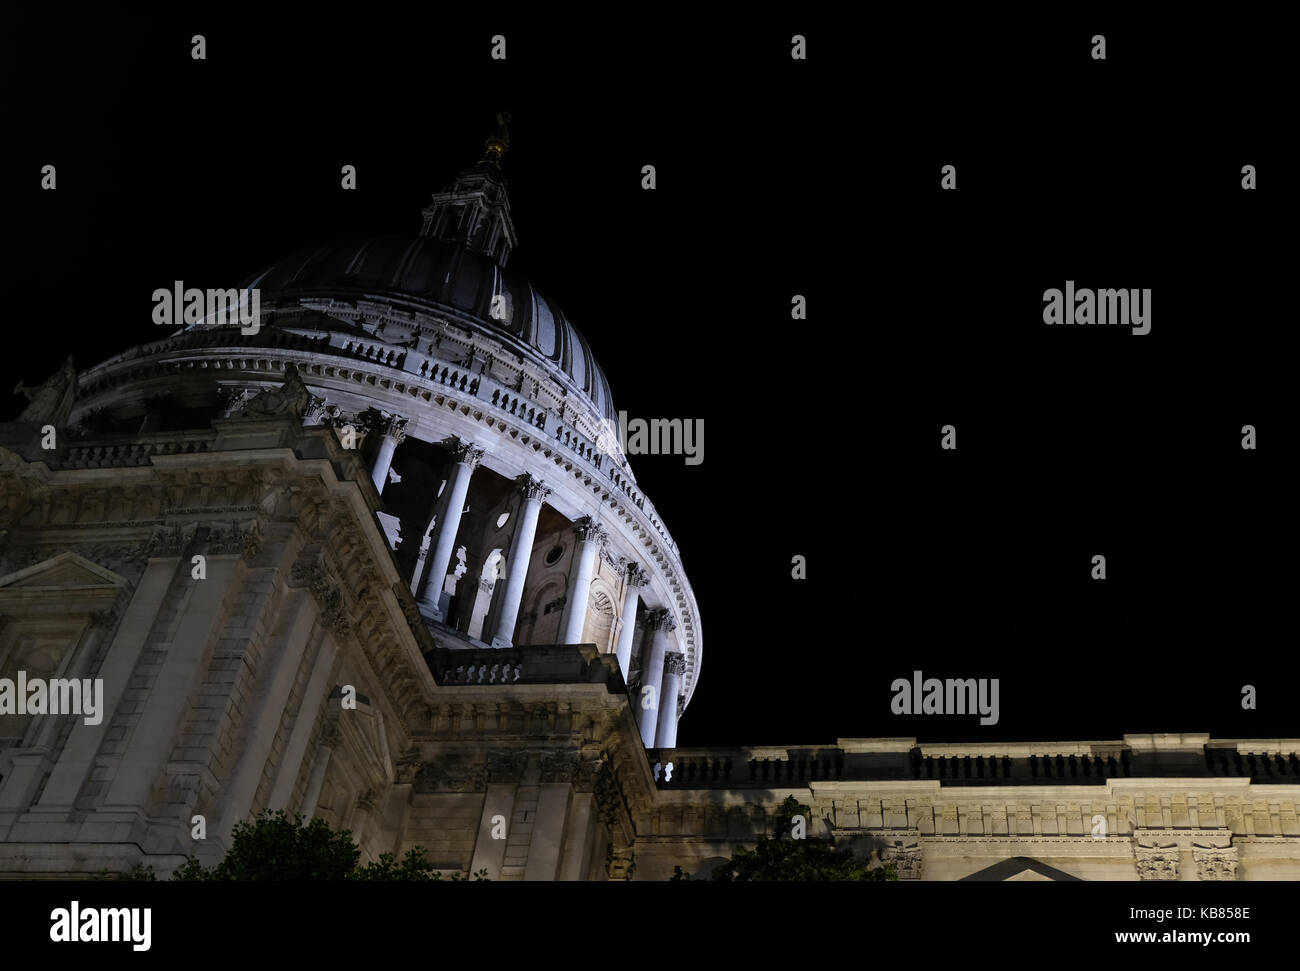 View of the dome of St Paul's Cathedral, London. Dome is illuminated at night. Photo taken from the street below. Stock Photo